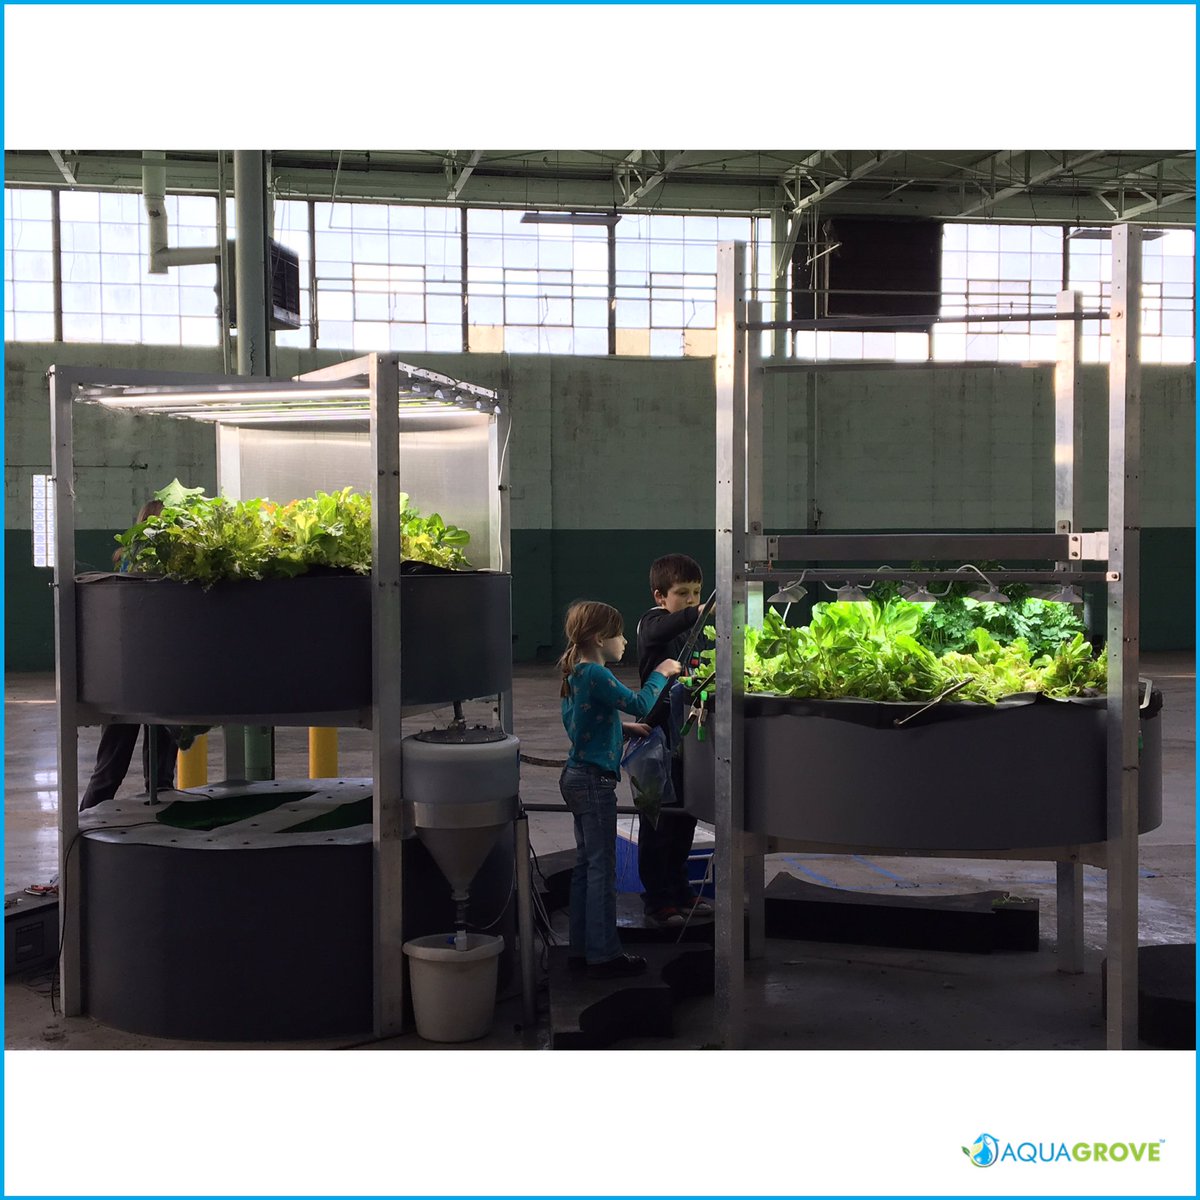 #flashbackfriday Making empty spaces green space - Looking back at an early AquaGrove system with an additional grow bed that transformed an empty warehouse in Detroit, Michigan into a healthy and thriving garden #aquaponics #sustainableliving #indoorag #education #aquagrove